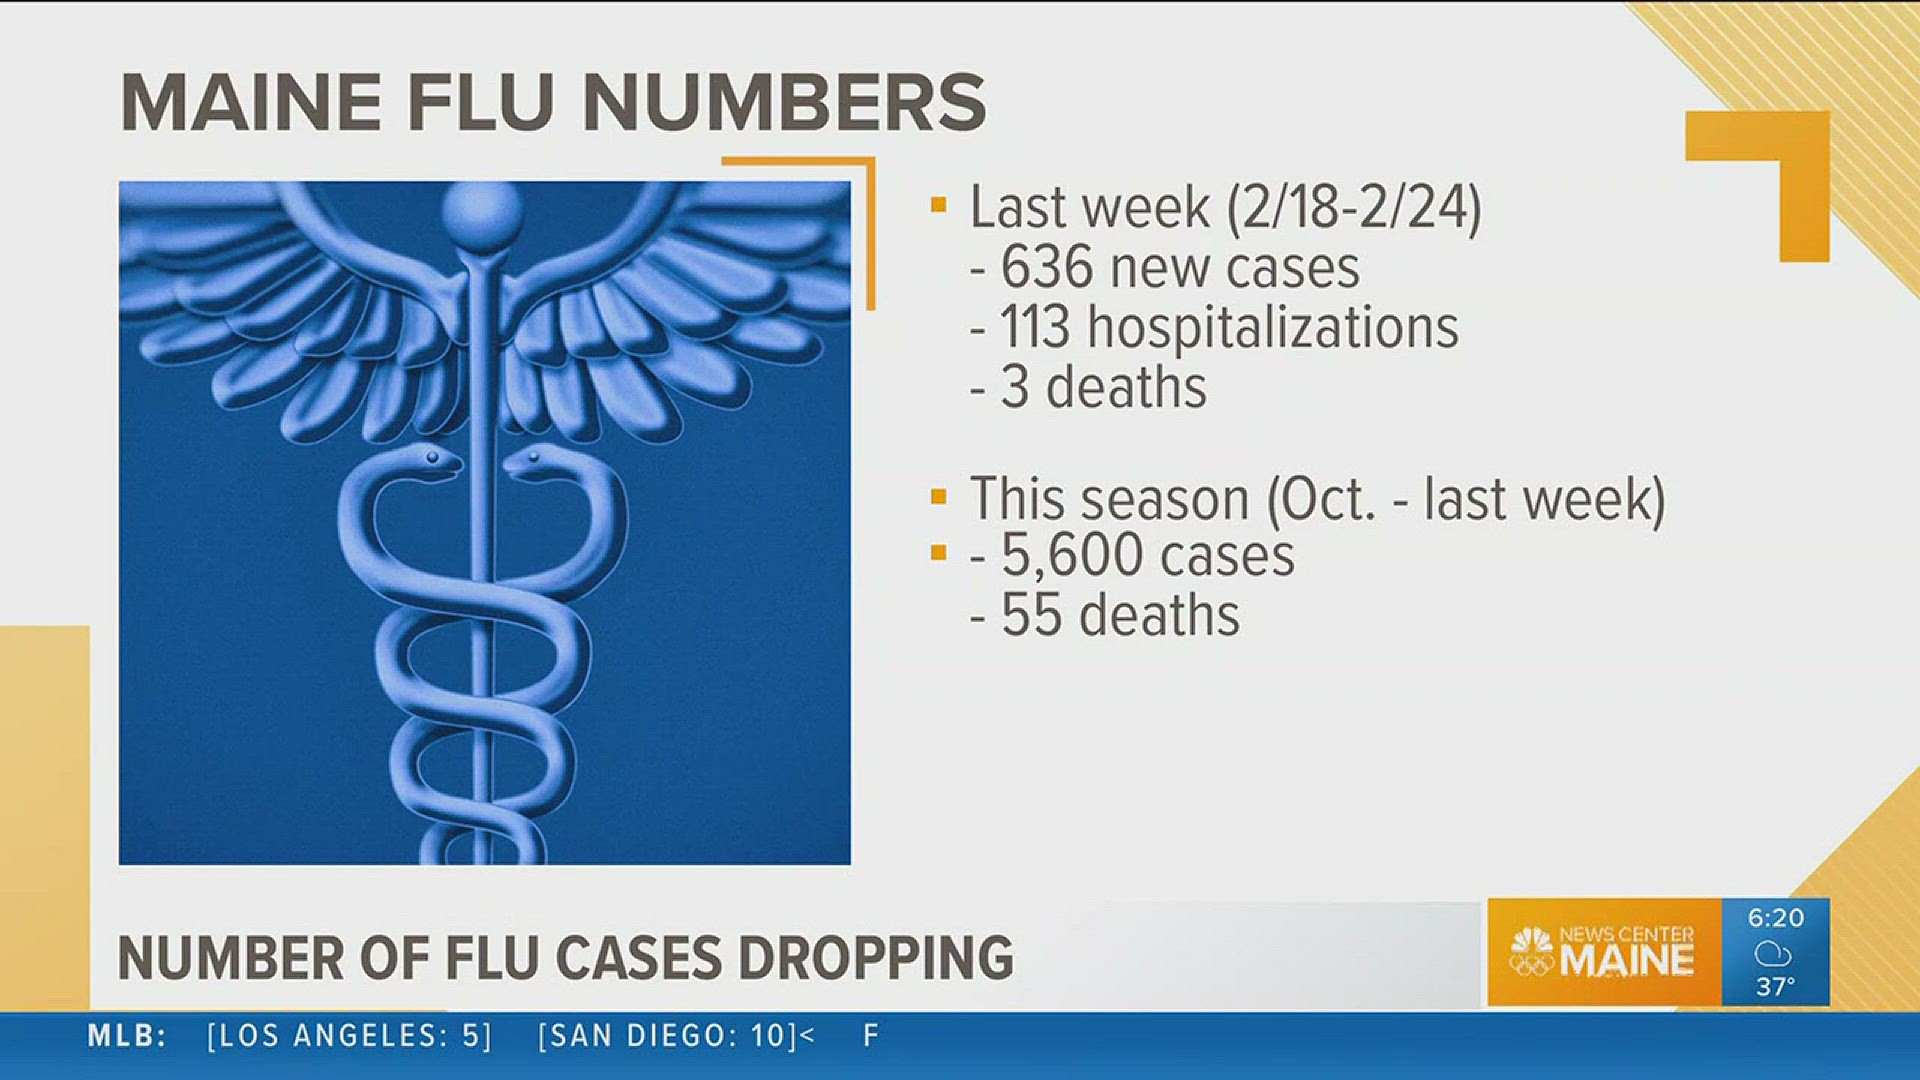 Worst of flu season may be over